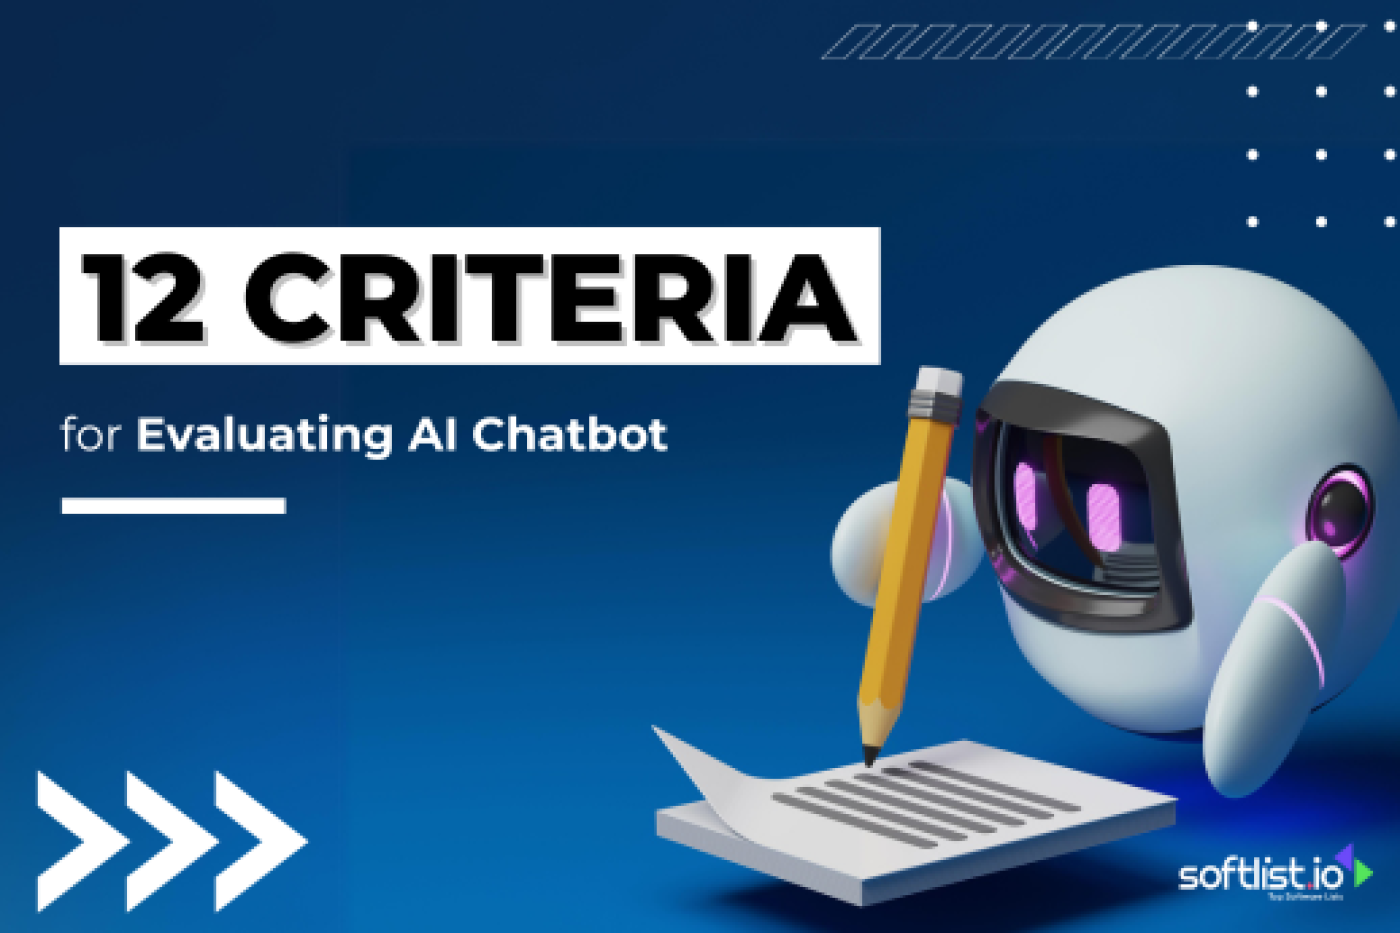 The 12 Criteria for Evaluating AI Chatbots